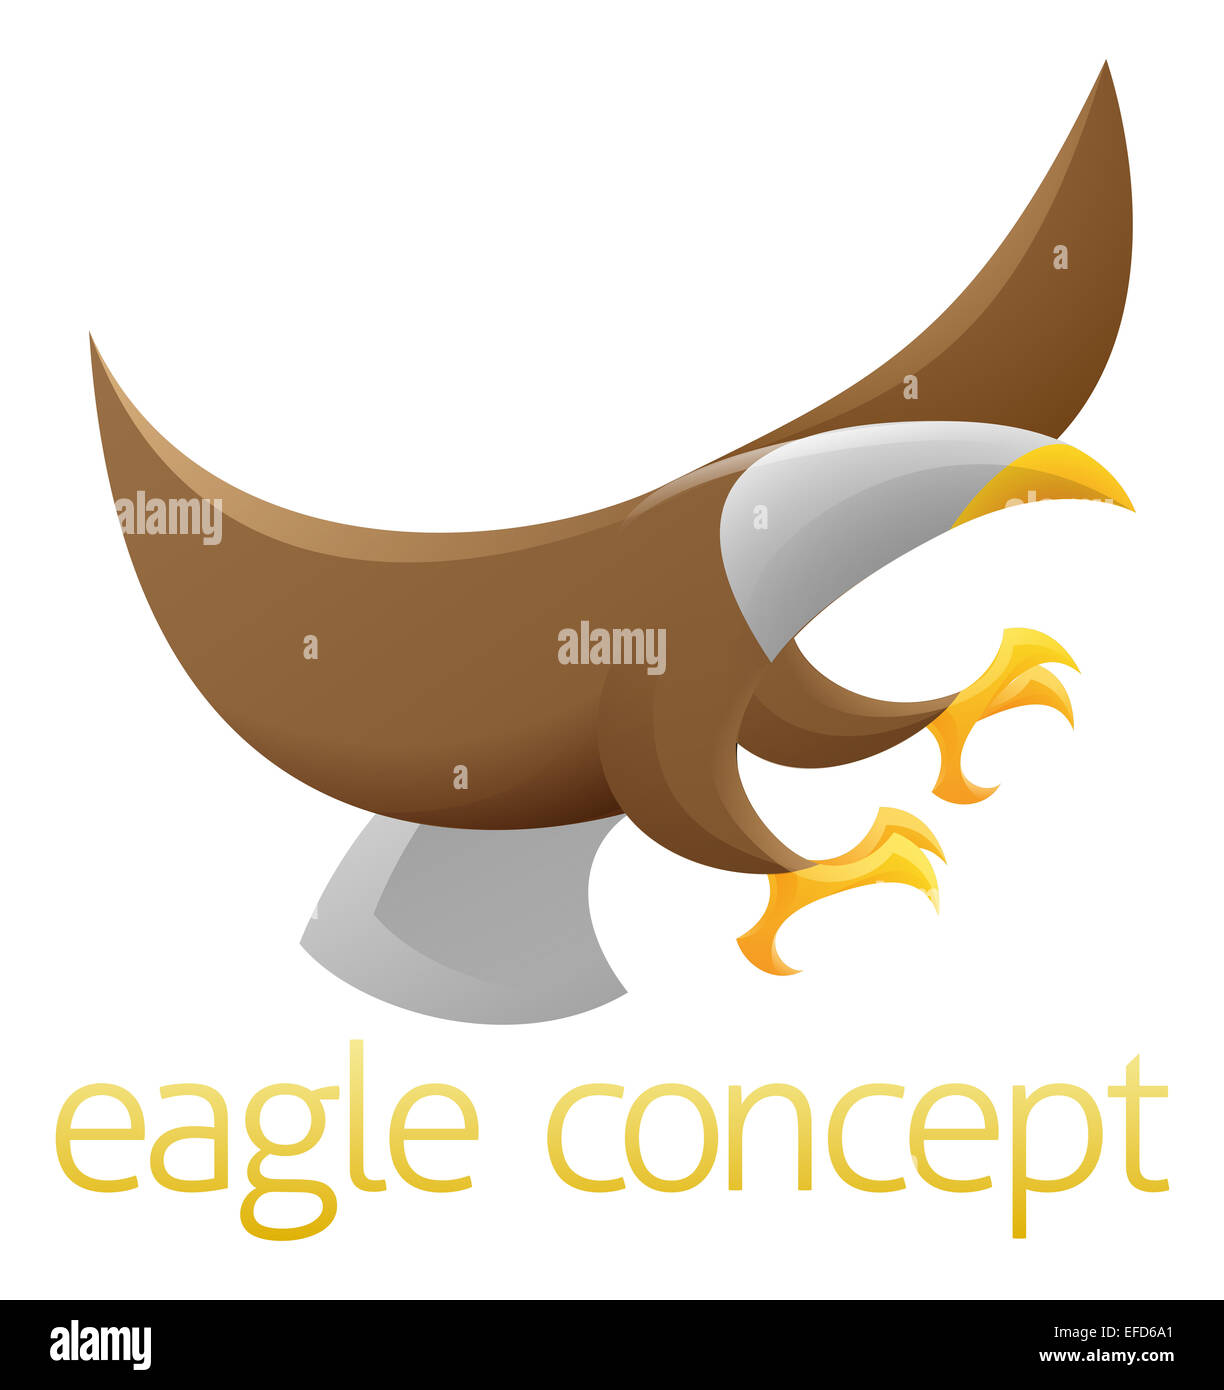 An abstract illustration of an eagle concept design Stock Photo